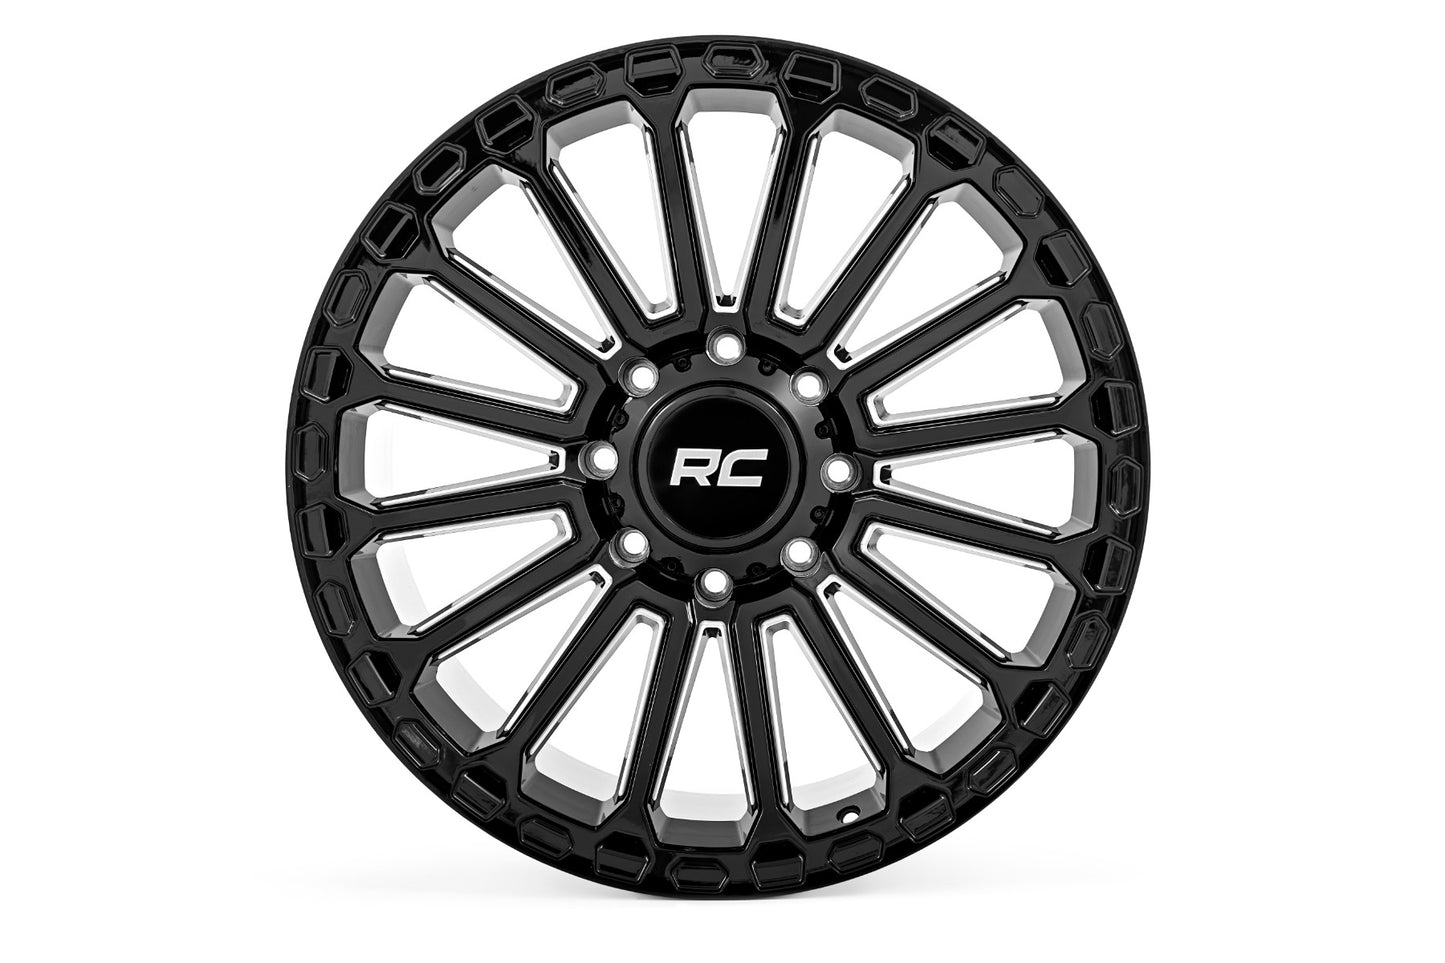 Rough Country 97 Series Wheel | One-Piece | Gloss Black | 22x10 | 6x135 | -19mm